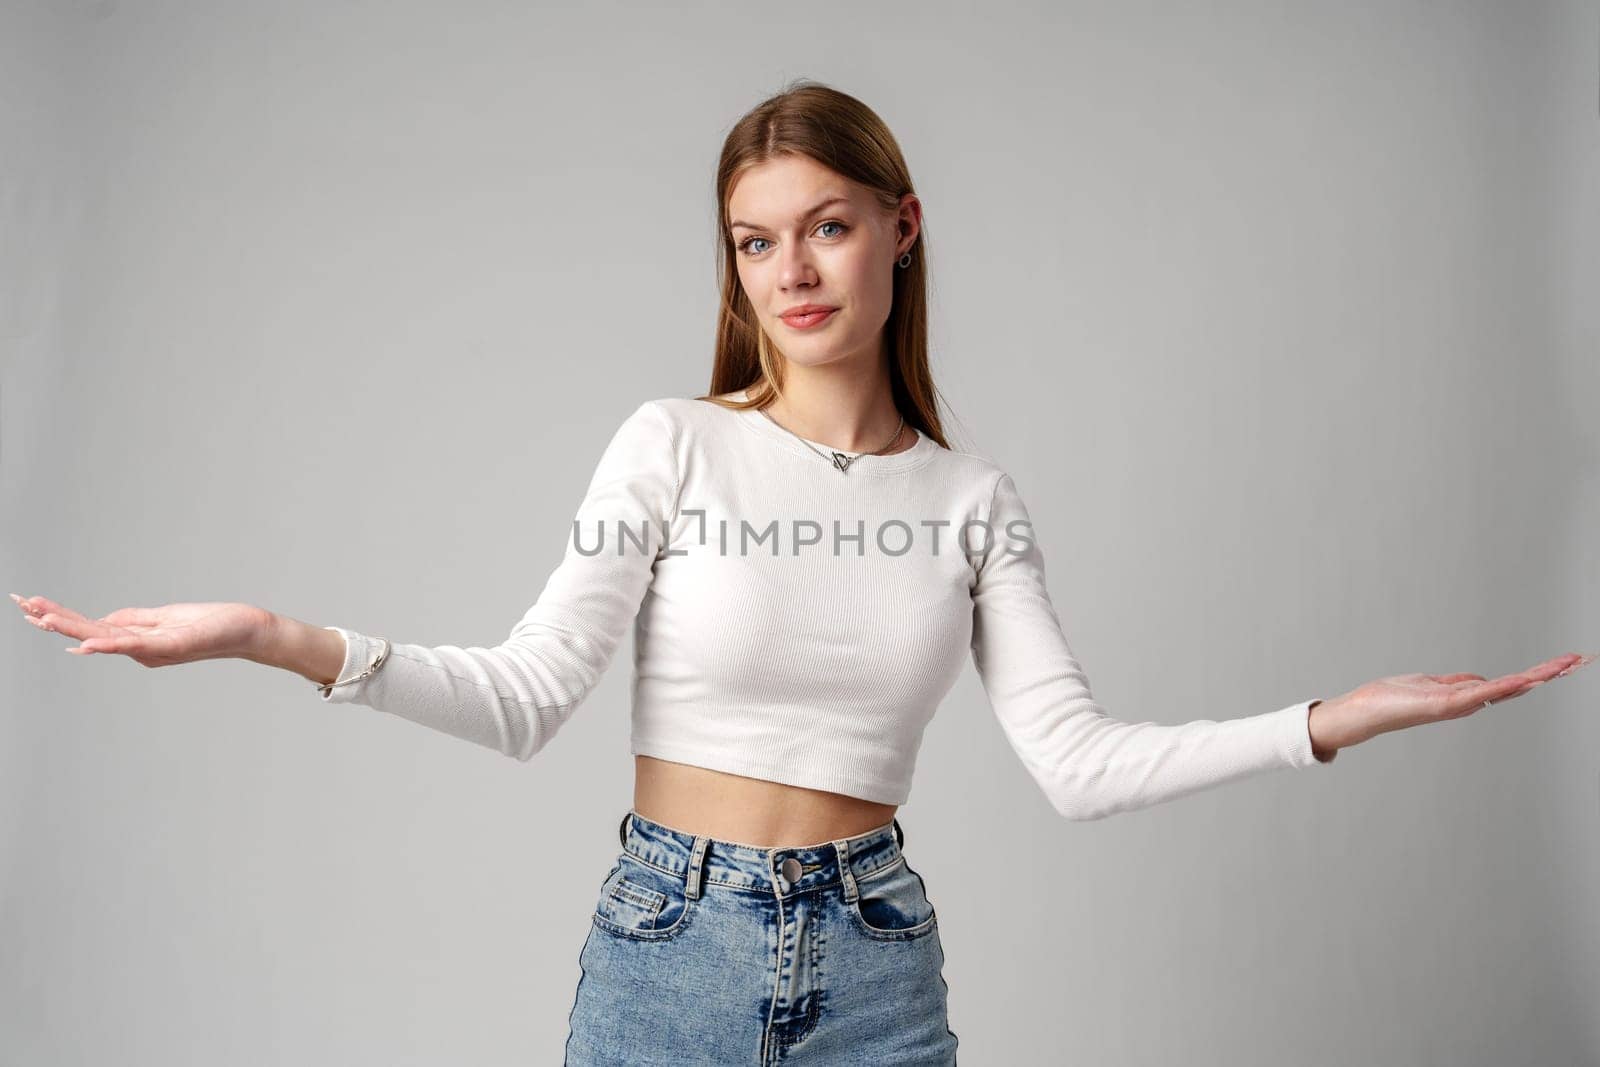 Young Woman in Blue Top Holding Out Hands in studio